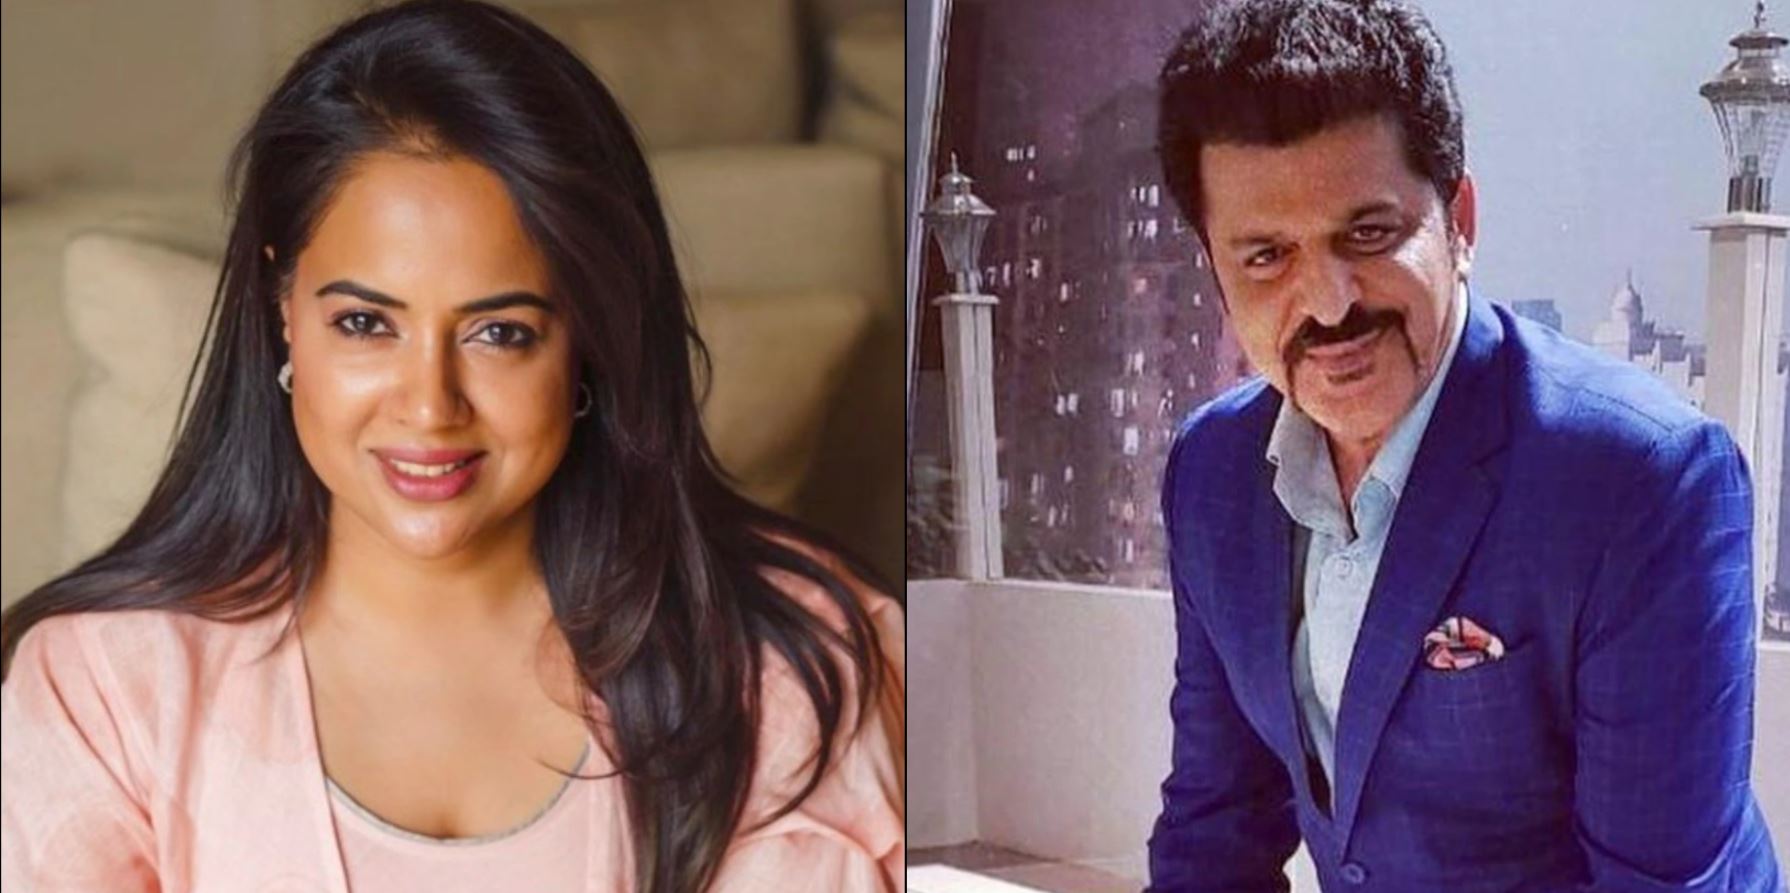 Sameera Reddy, Rajesh Khattar Test Positive For COVID-19, Latter Admitted To Hospital For Family's Safety